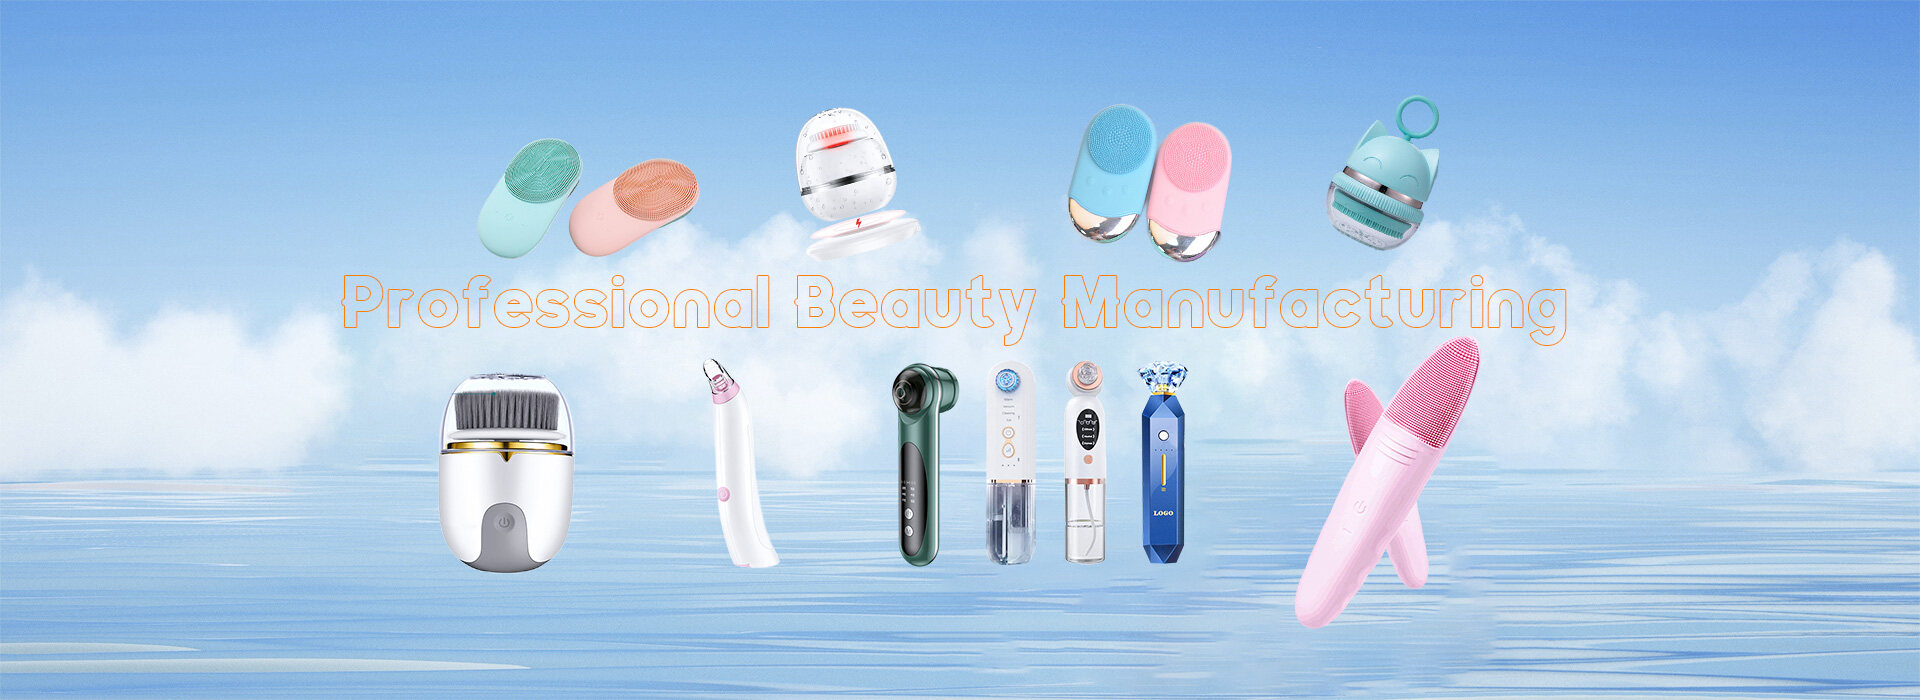 Face Care Lifting belt Double Chin Reducer Slimming Belt Face Strap V-Face Shaping Massager,22 Inch Trending Products 2022 New Arrivals Led Lash Light Eyelash Moon Eyebrow Tattoo Makeup,Summer New Arrival Multi-Function Portable Facial Steamer 2in1 Electric Face Hot Spray Device Facial Steamer,Hot Sale Electric Lip Care Beauty Product High Quality Private Label Lip Plumper Equipment For Sexy Woman,Hair Salon Equipment Furniture Wholesale Price Portable Wooden Foldable Beauty Bed Manufacturers